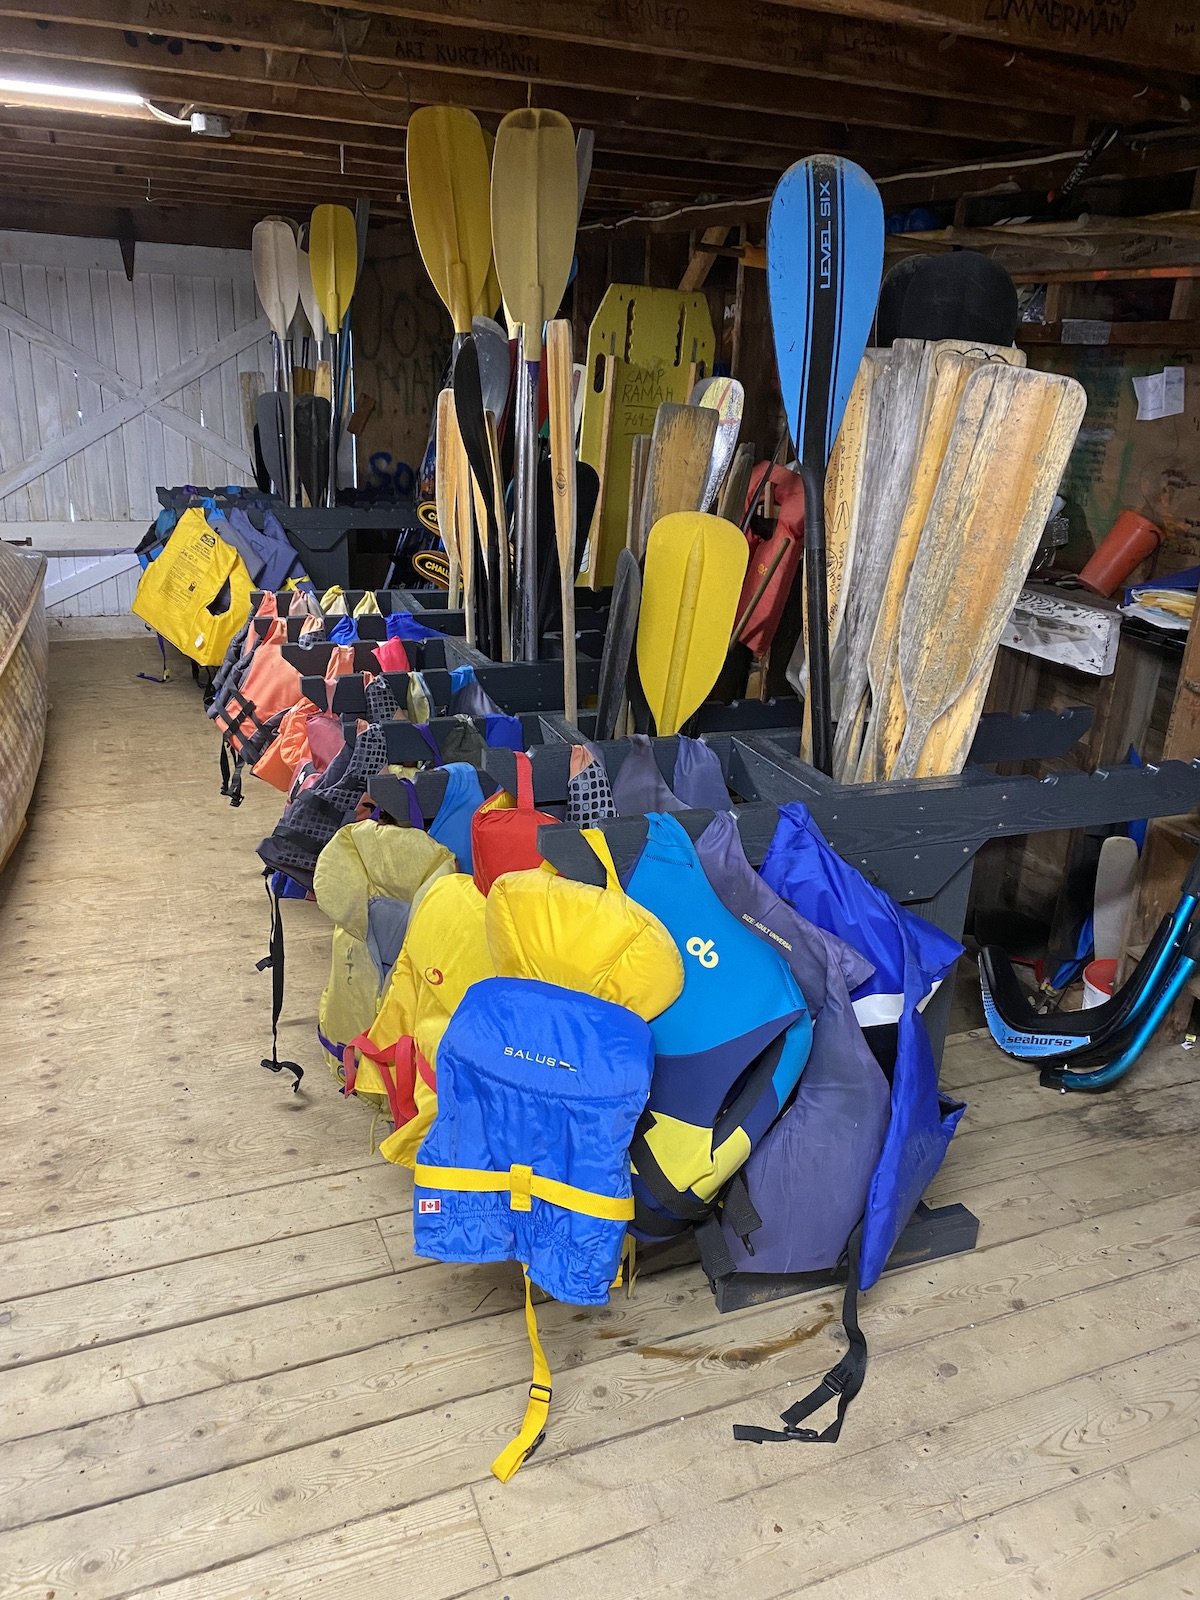 Paddlesport Accessory Racks - Made by Storage Rack Solutions